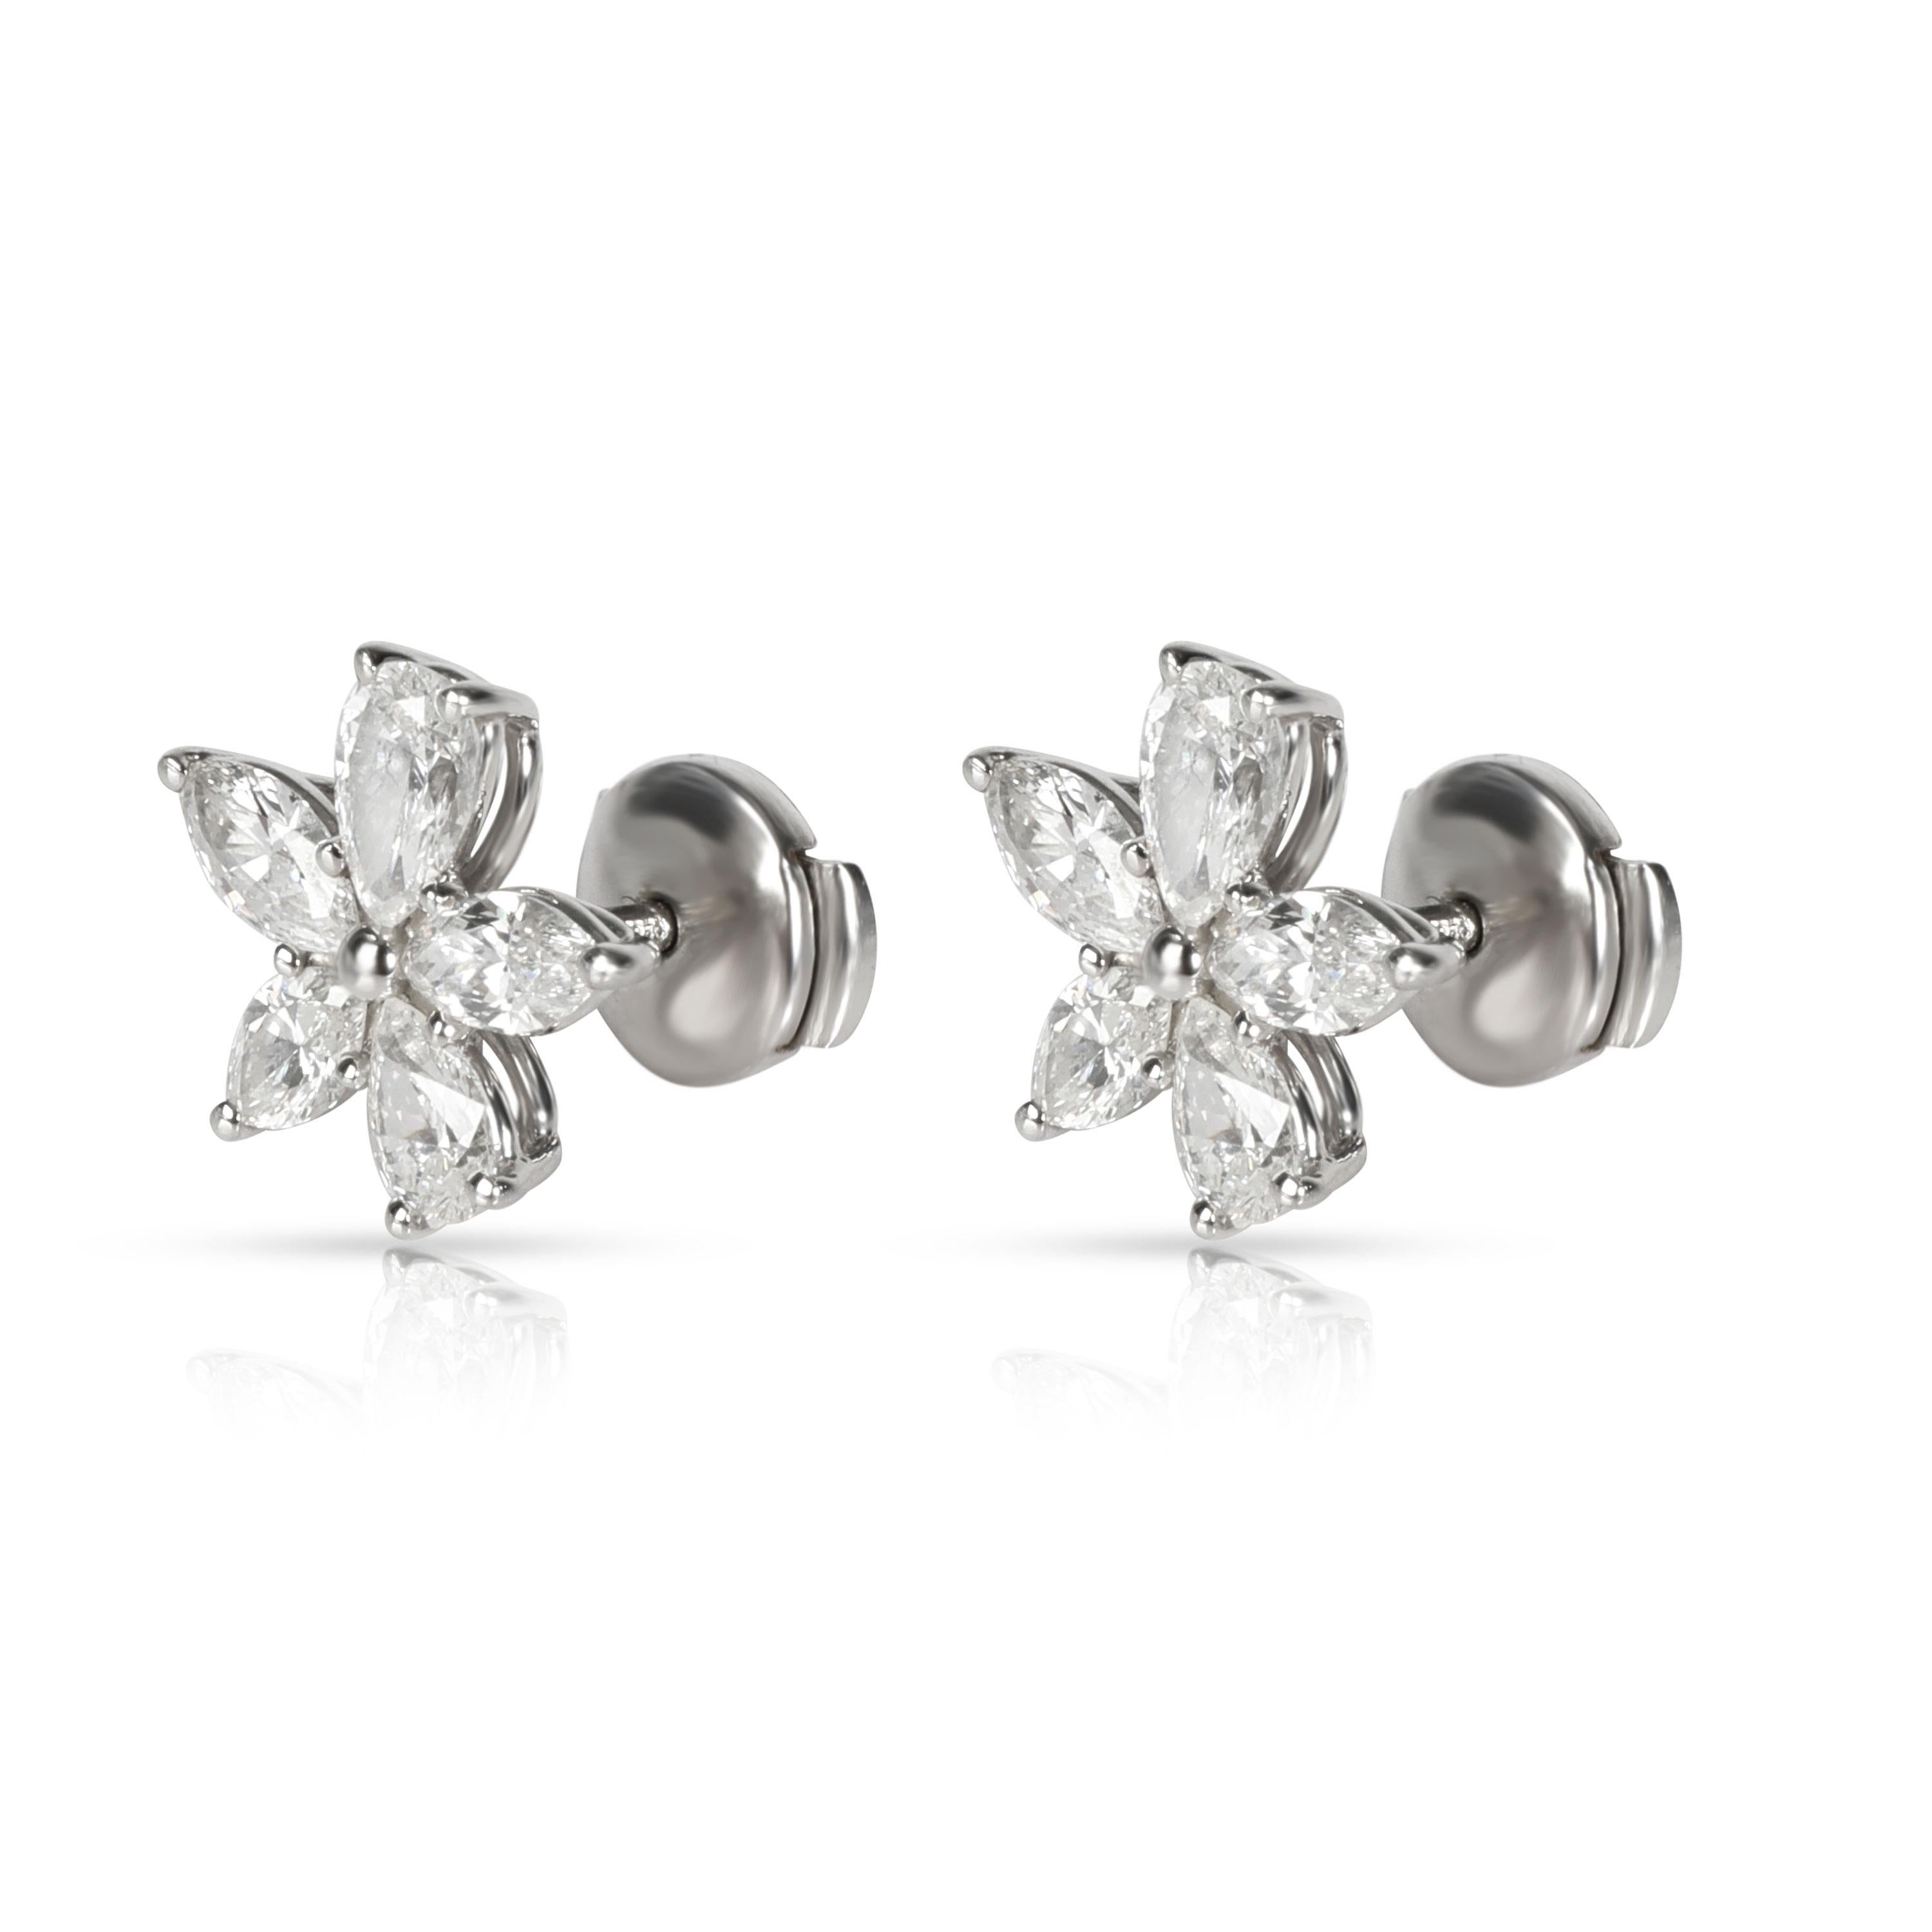 Tiffany & Co. Victoria Diamond Earring in Platinum 1.77 CTW

PRIMARY DETAILS
SKU: 106460
Listing Title: Tiffany & Co. Victoria Diamond Earring in Platinum 1.77 CTW
Condition Description: Retails for 16,900 USD. In excellent condition and recently